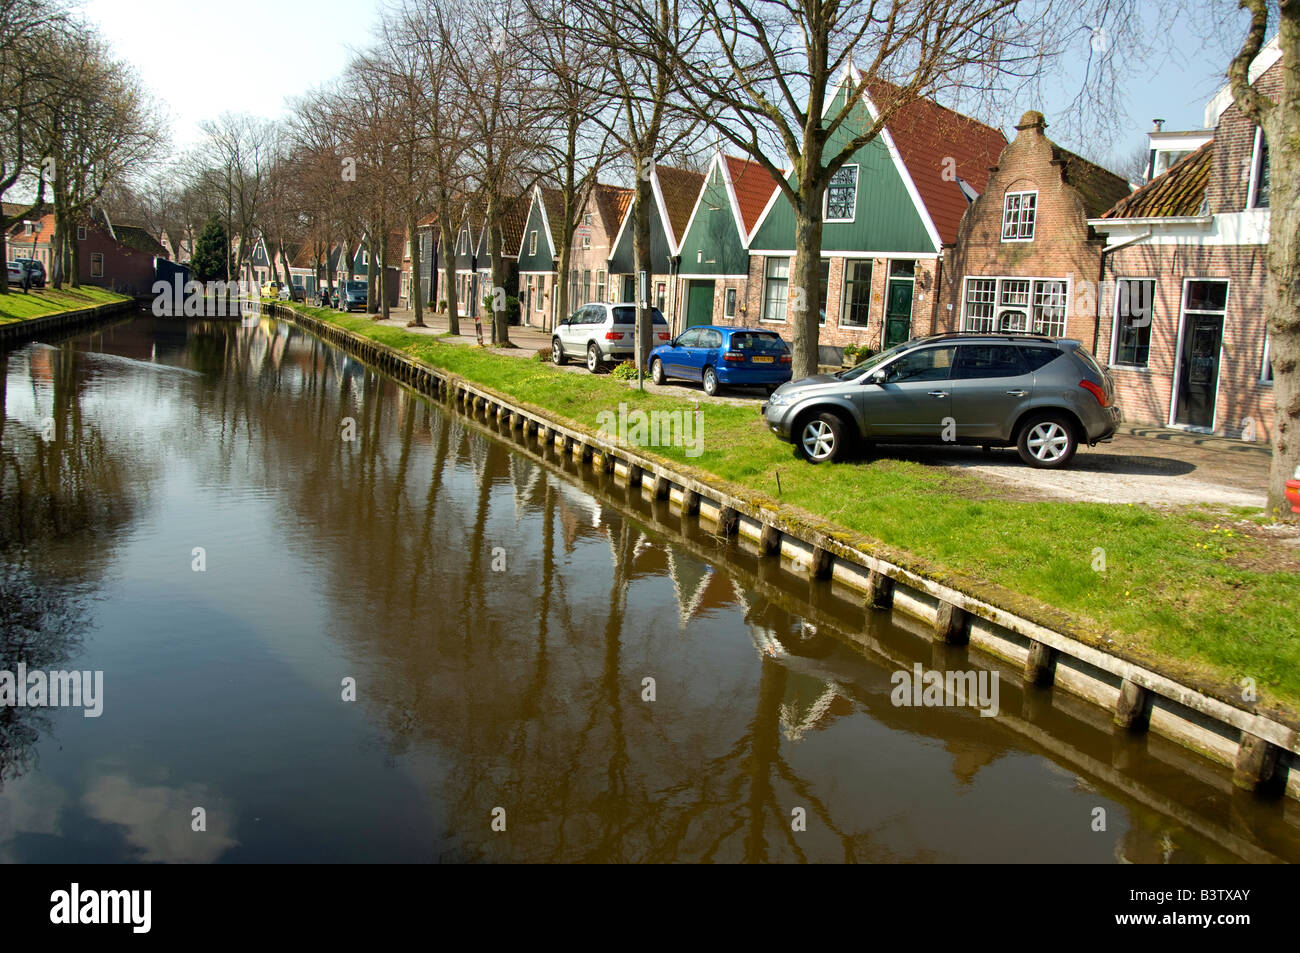 Europe, The Netherlands (aka Holland). Medieval cheese producing town of Edam. Typical homes long canal. Stock Photo